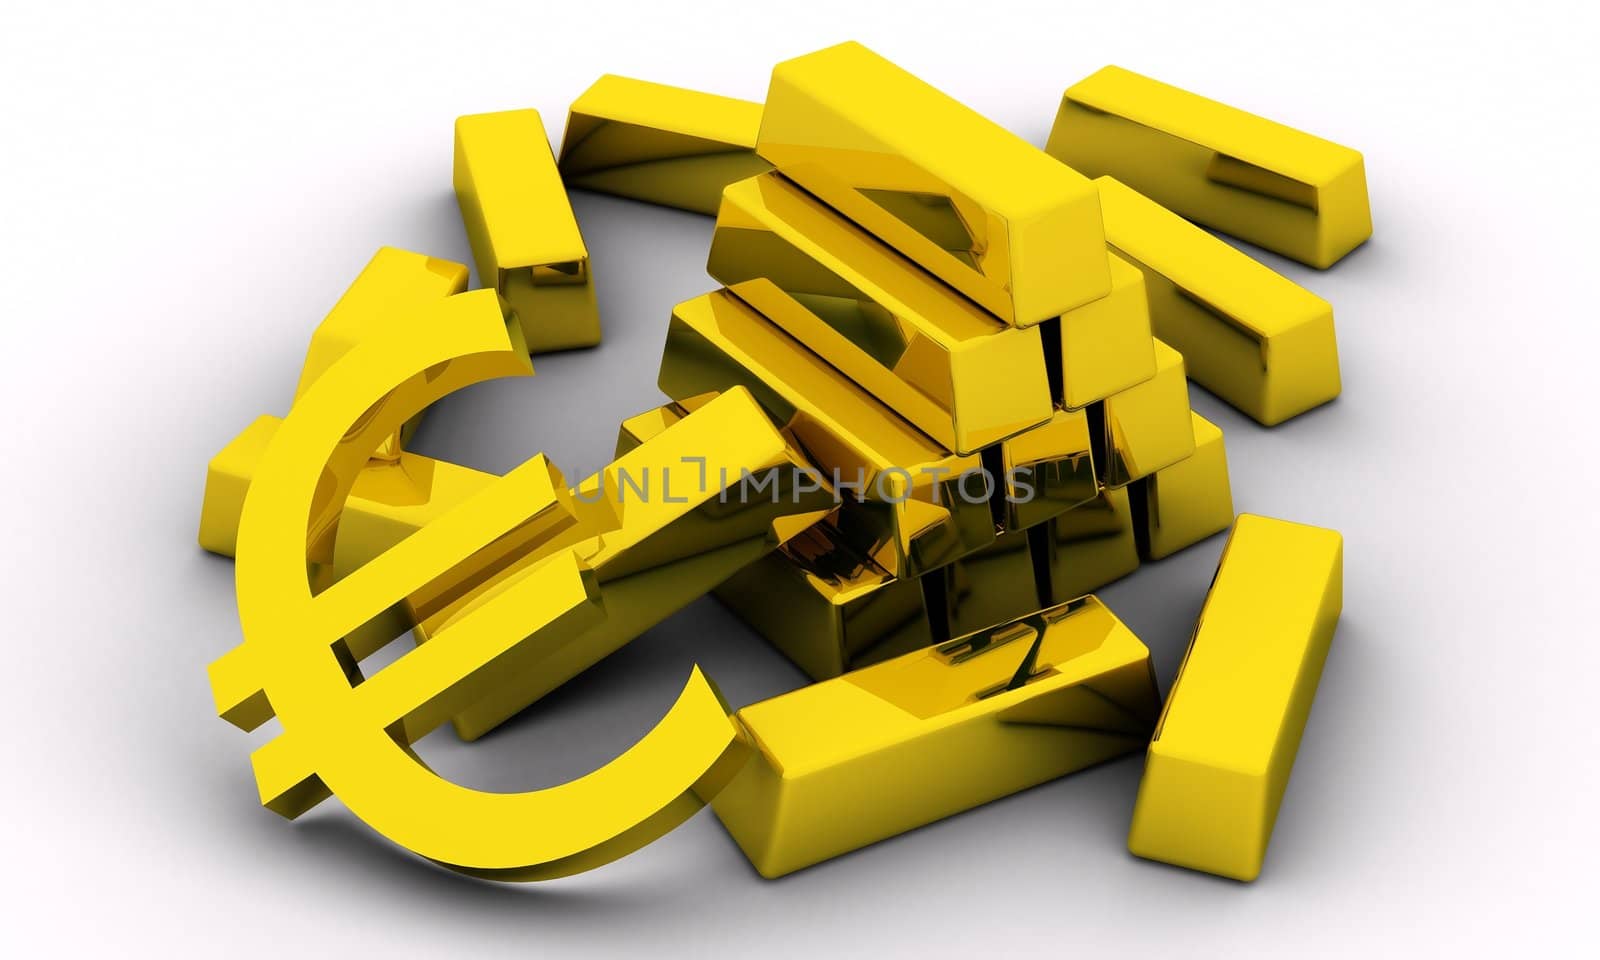 Gold bars and golden euro sign on white background.
